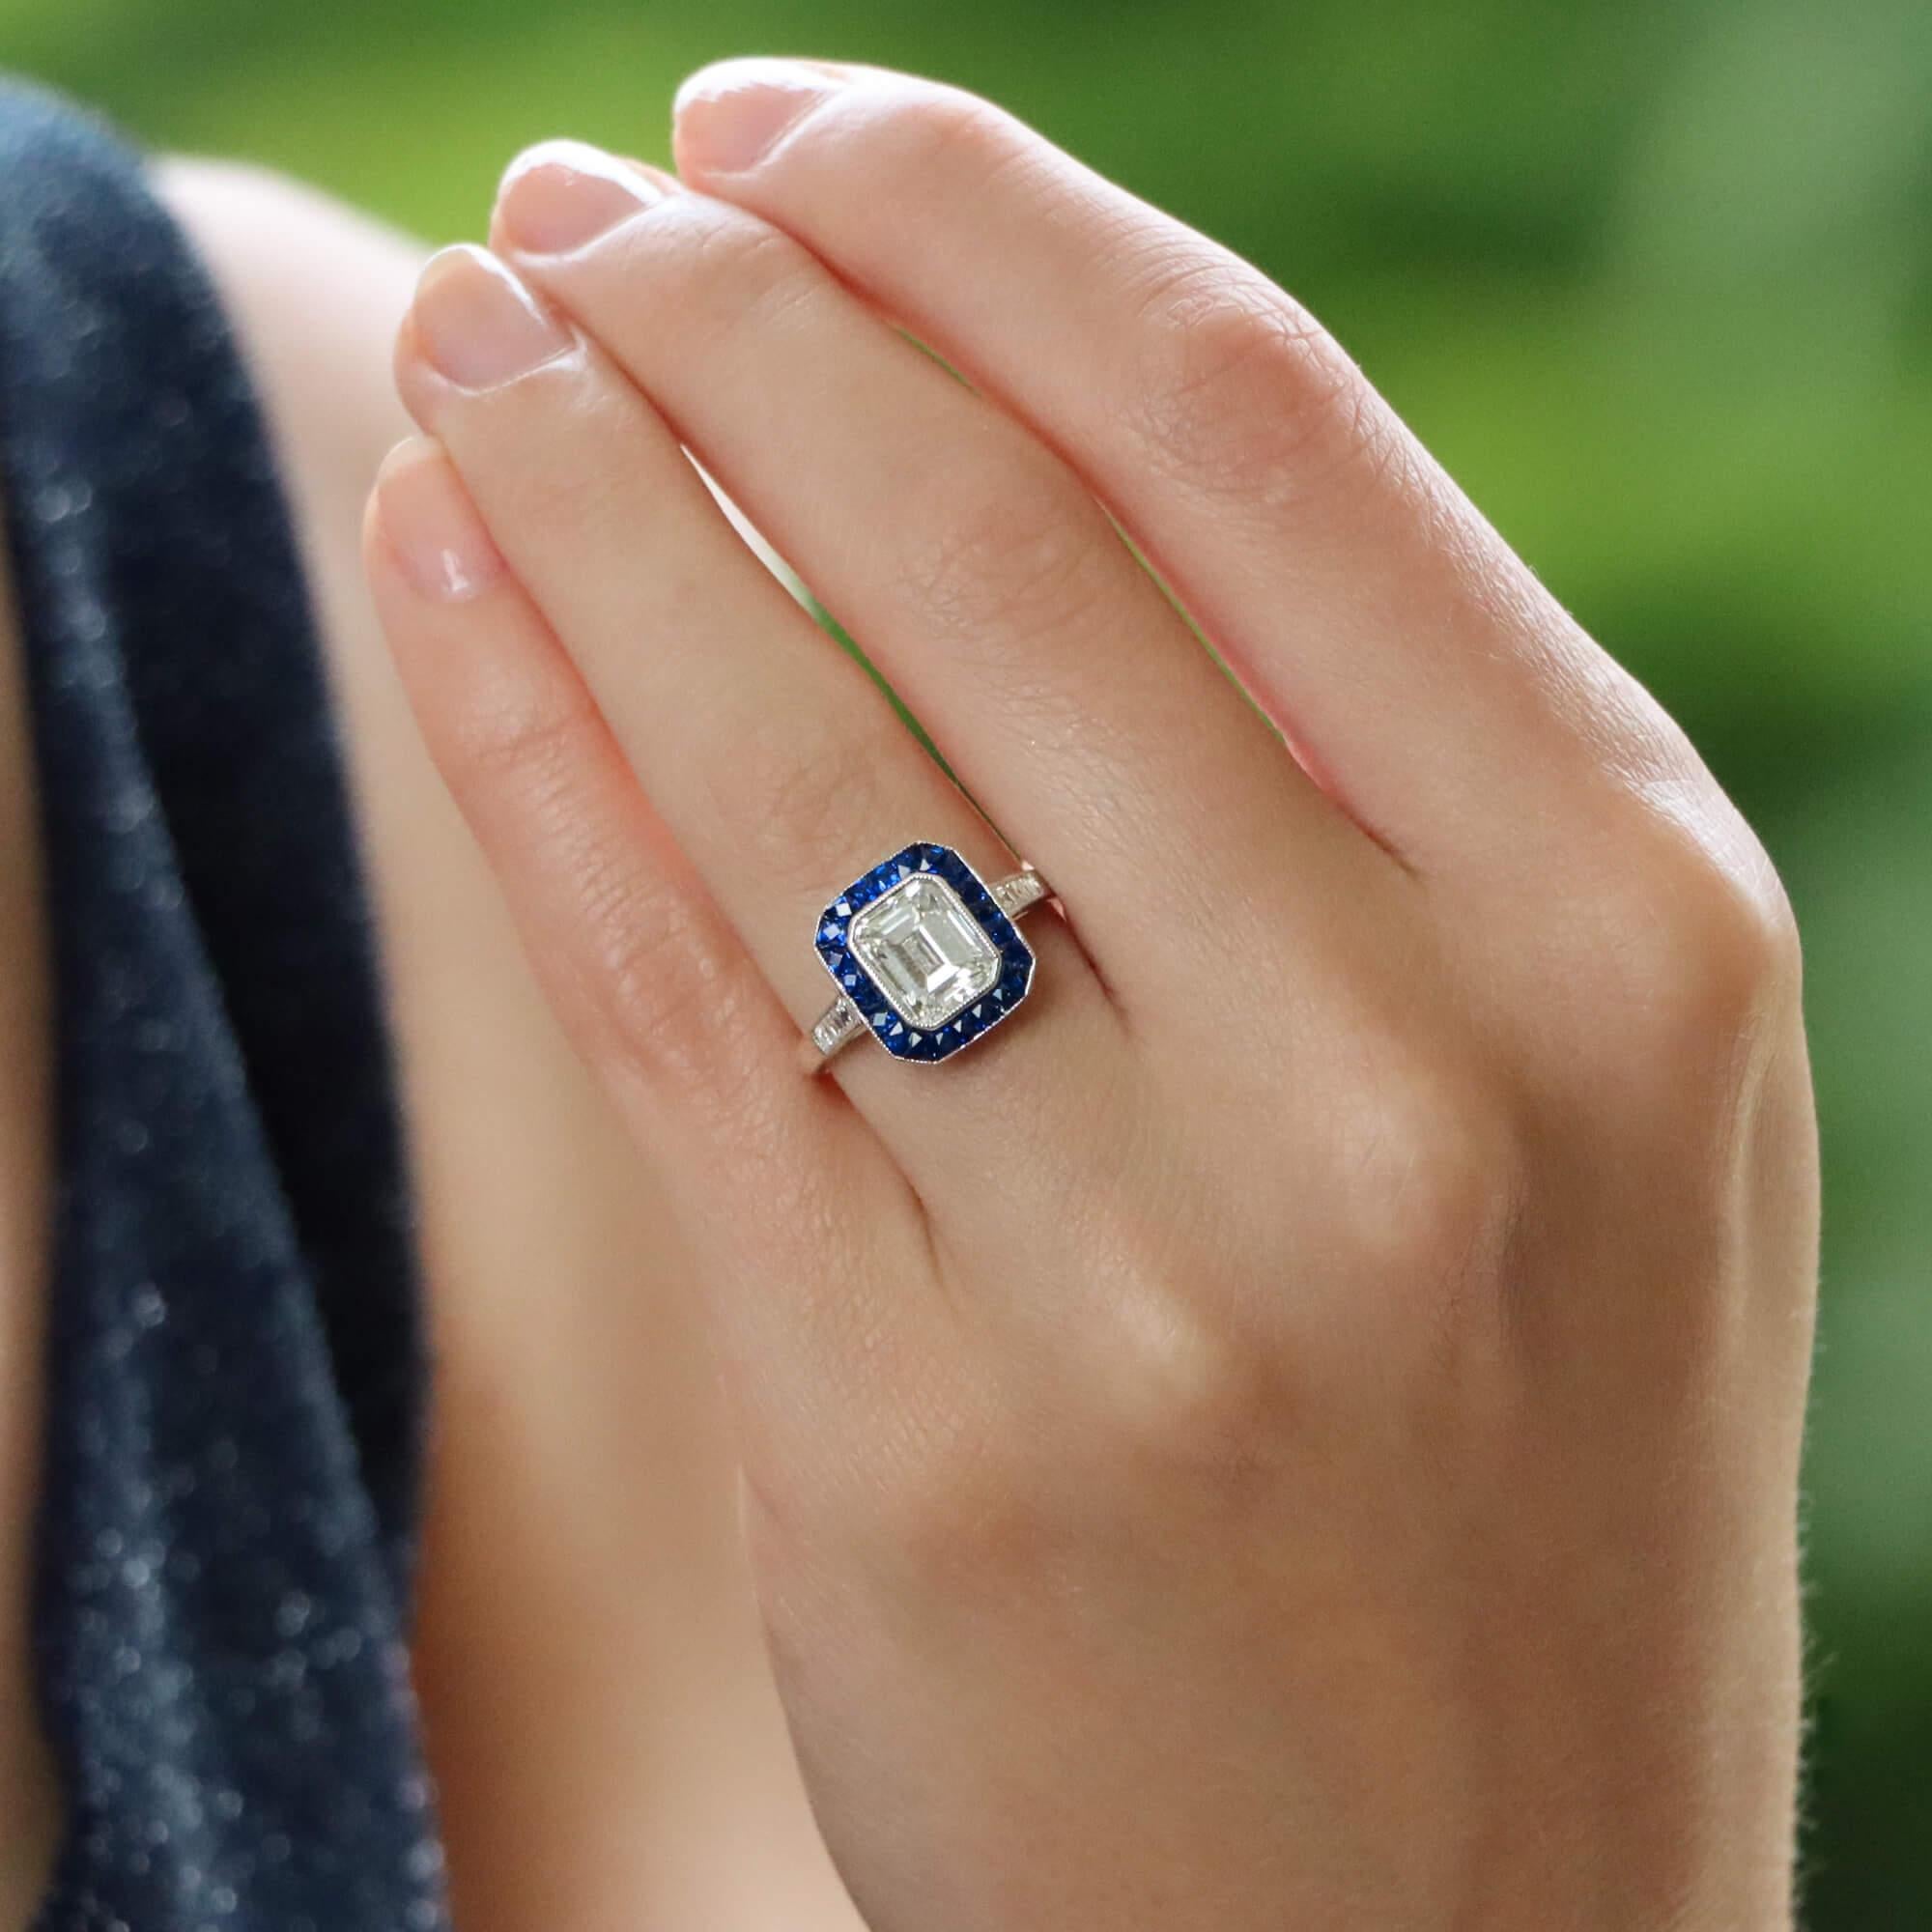 A beautiful Art Deco inspired emerald cut diamond and sapphire target ring set in platinum.

The ring is predominantly set with an extremely sparkly 2.03 carat emerald cut diamond which is securely bezel set to centre. Surrounding the central